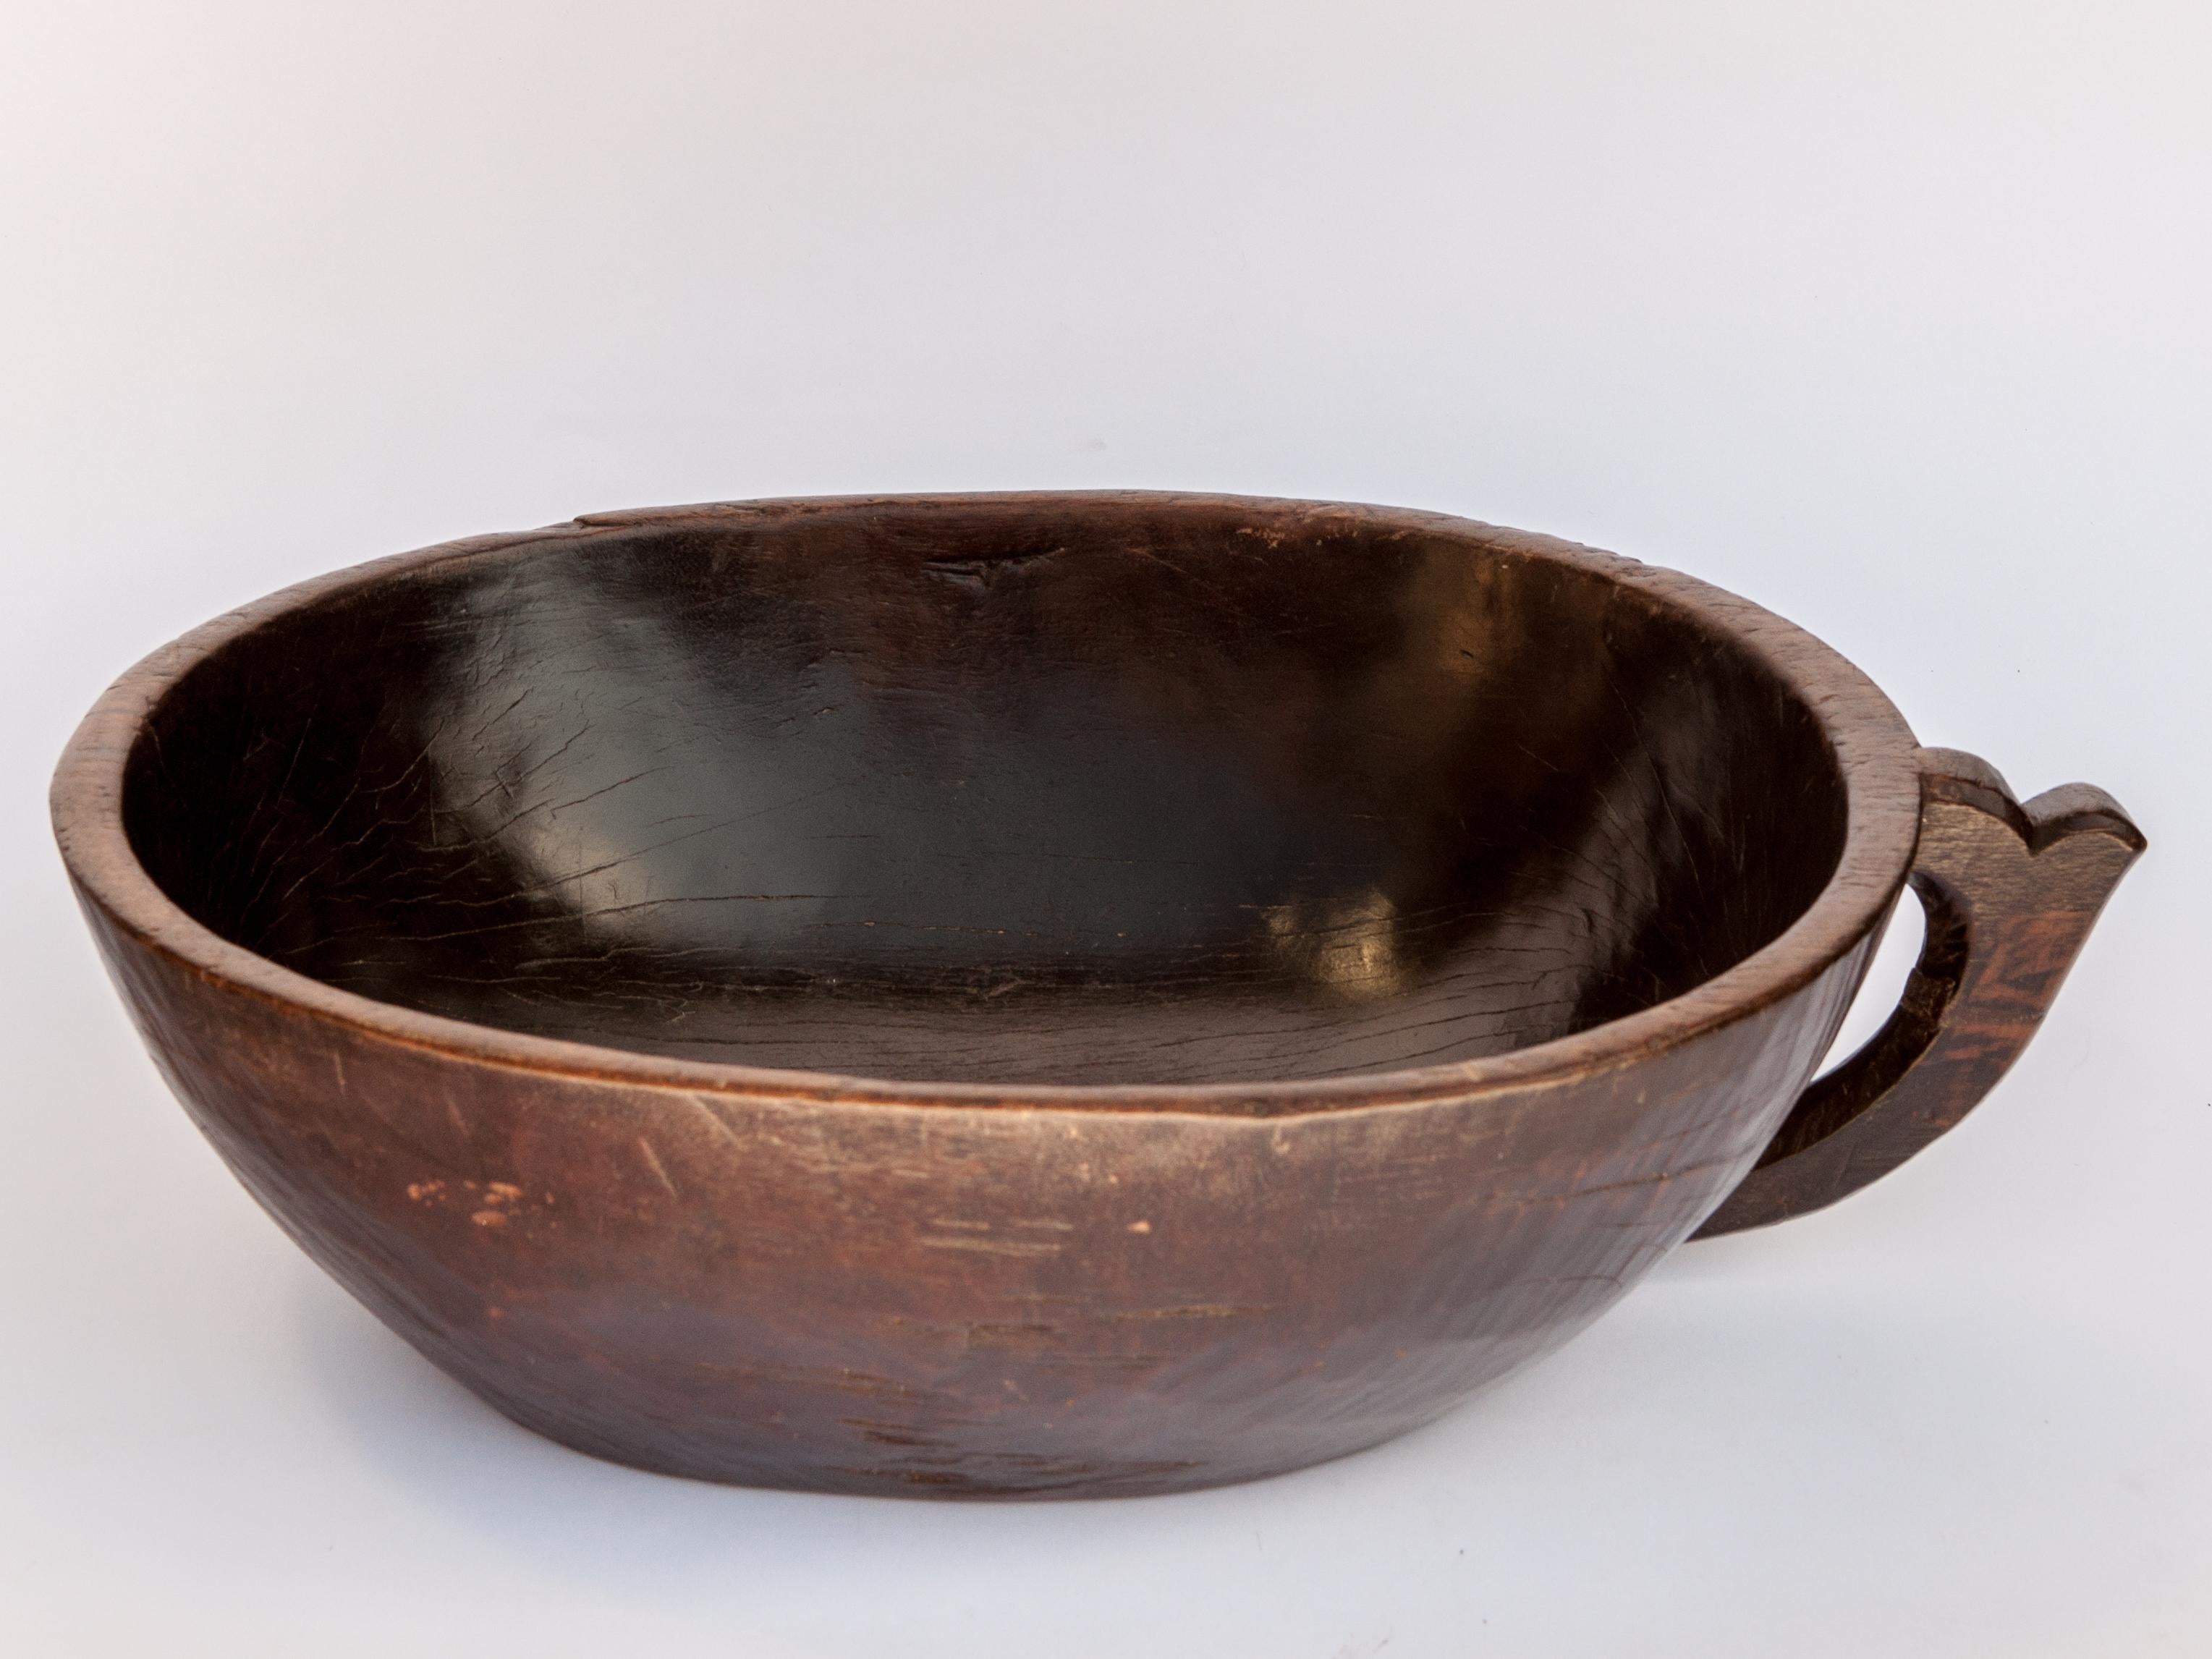 Tribal Hand Hewn Wooden Bowl with Handle from Sulawesi, Indonesia, Mid-20th Century